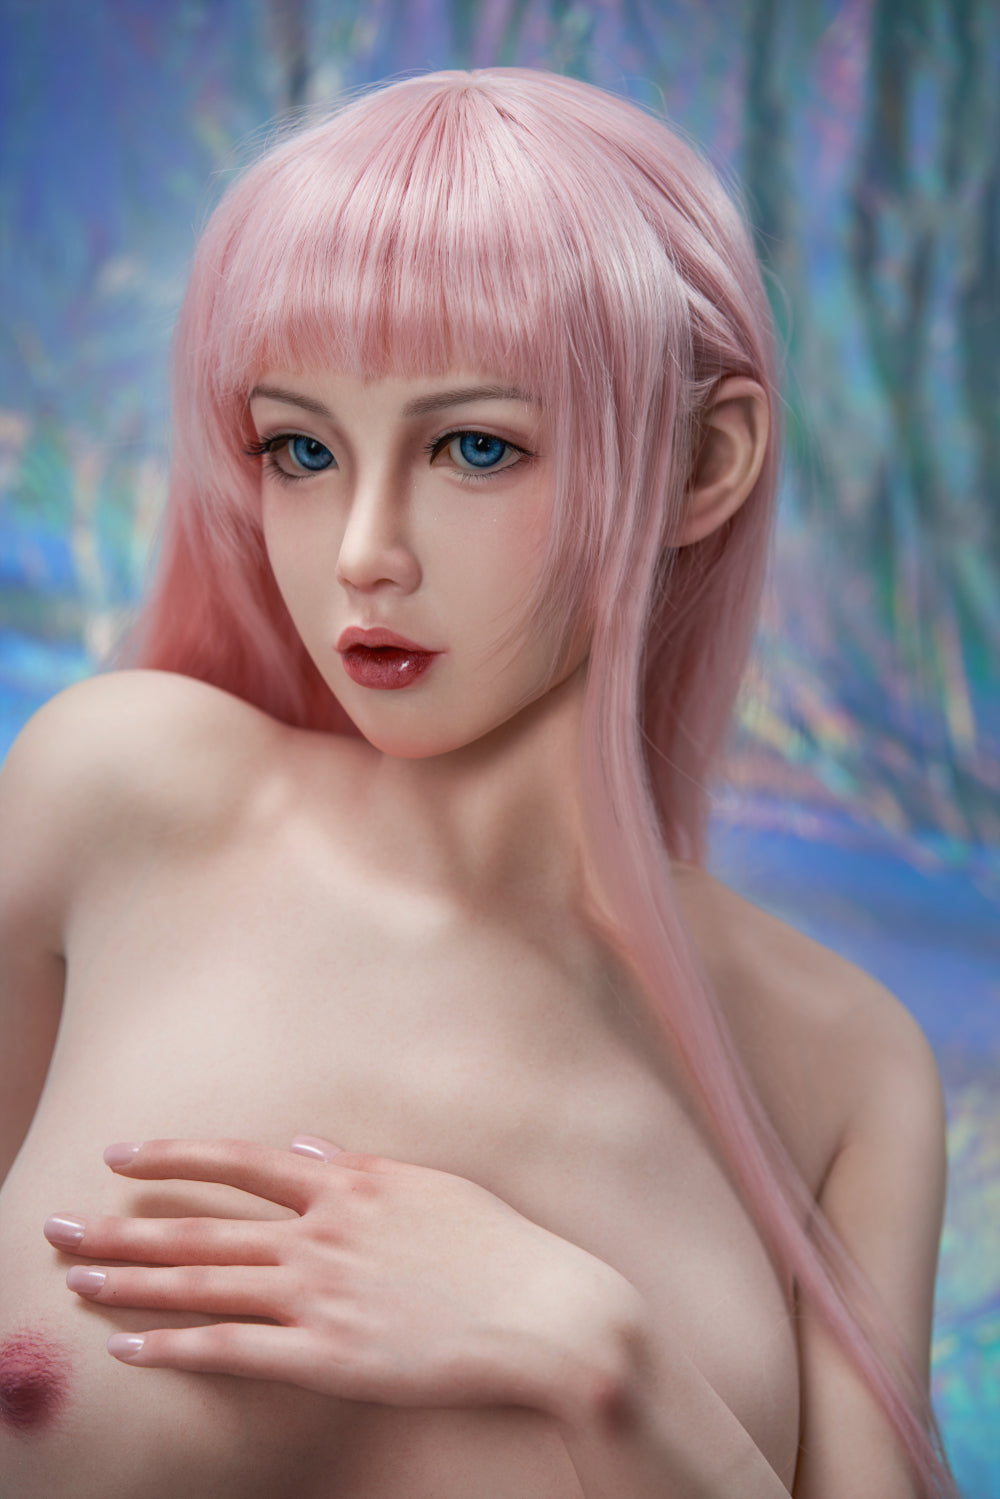 Zelex Doll X165 cm F Silicone - Benna | Buy Sex Dolls at DOLLS ACTUALLY